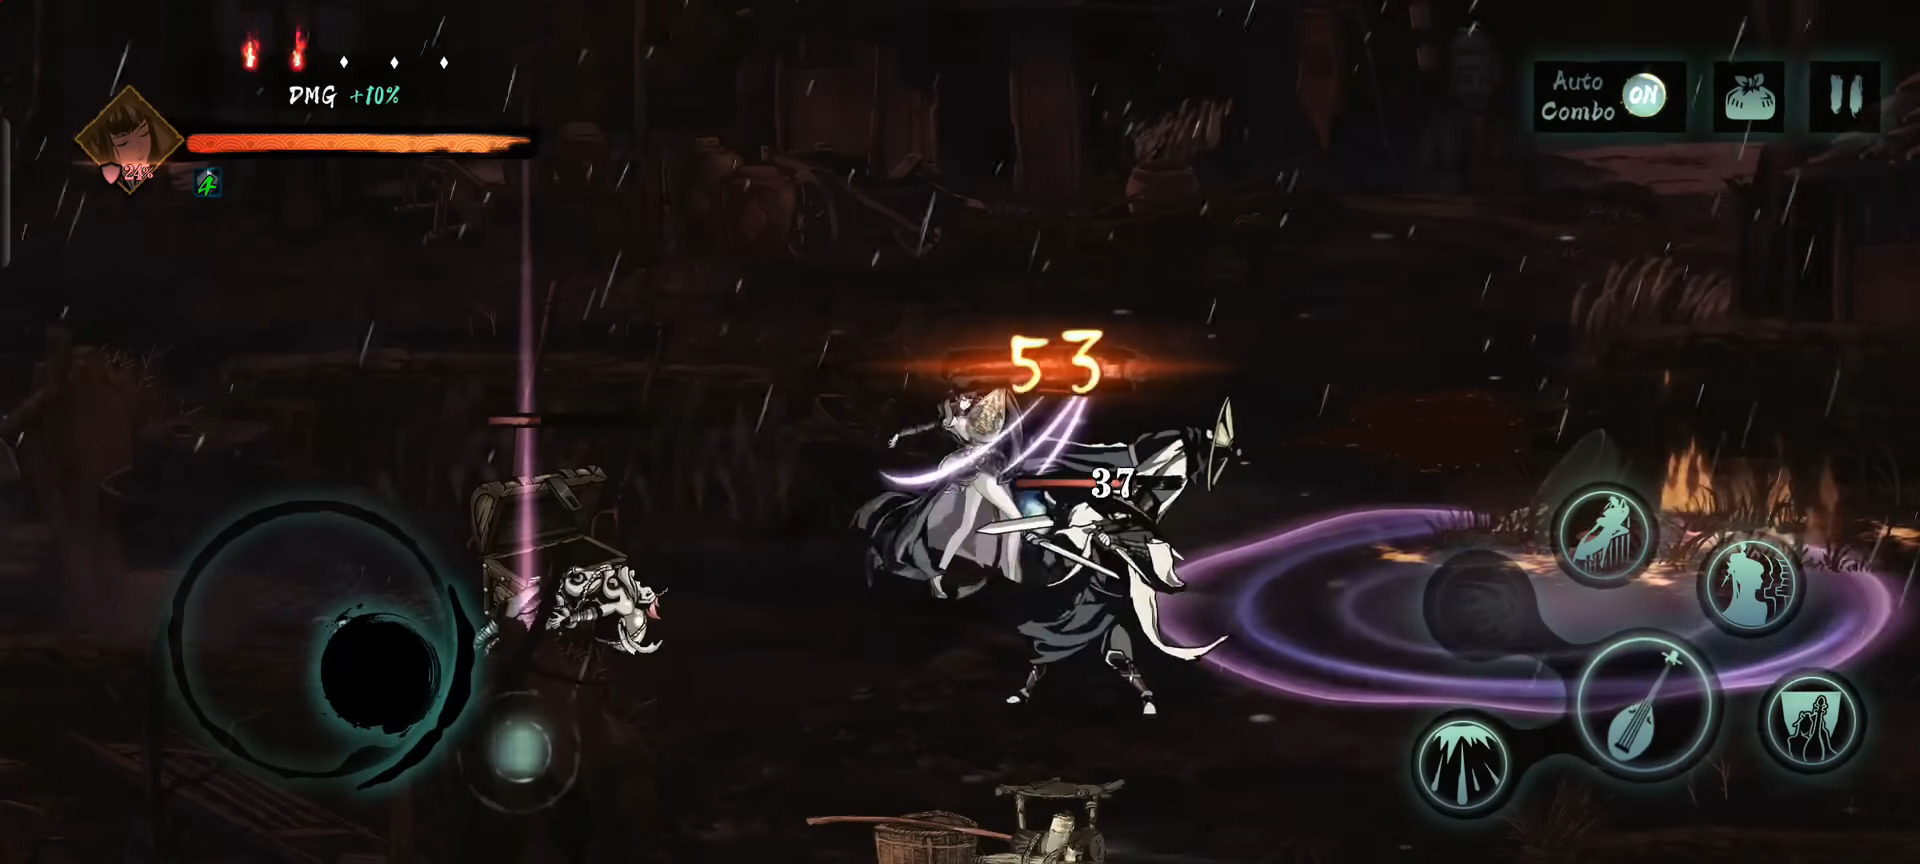 Gameplay of the Phantom Blade: Executioners for Android phone or tablet.